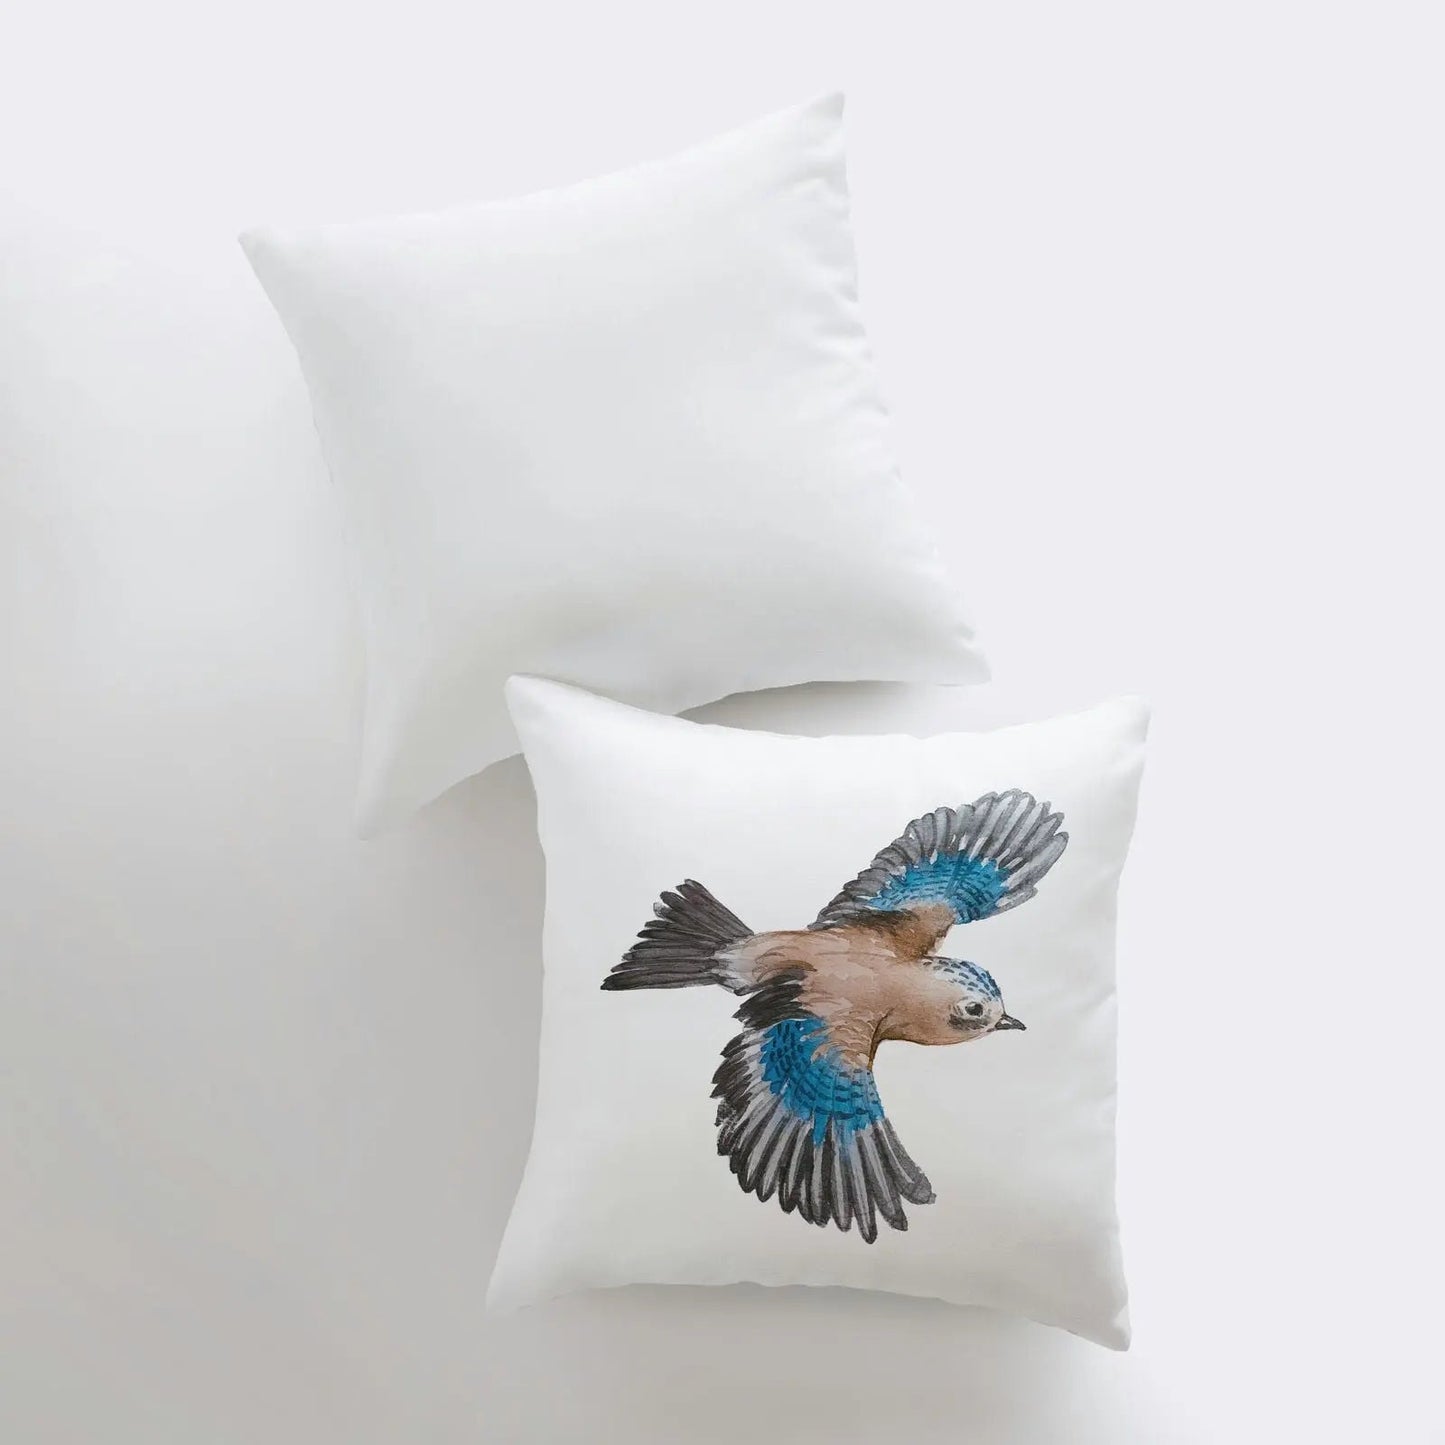 Watercolor Bluebird | Gifts | Brid Prints | Bird Decor | Accent Pillow Covers | Throw Pillow Covers | Pillow | Room Decor | Bedroom Decor by UniikPillows